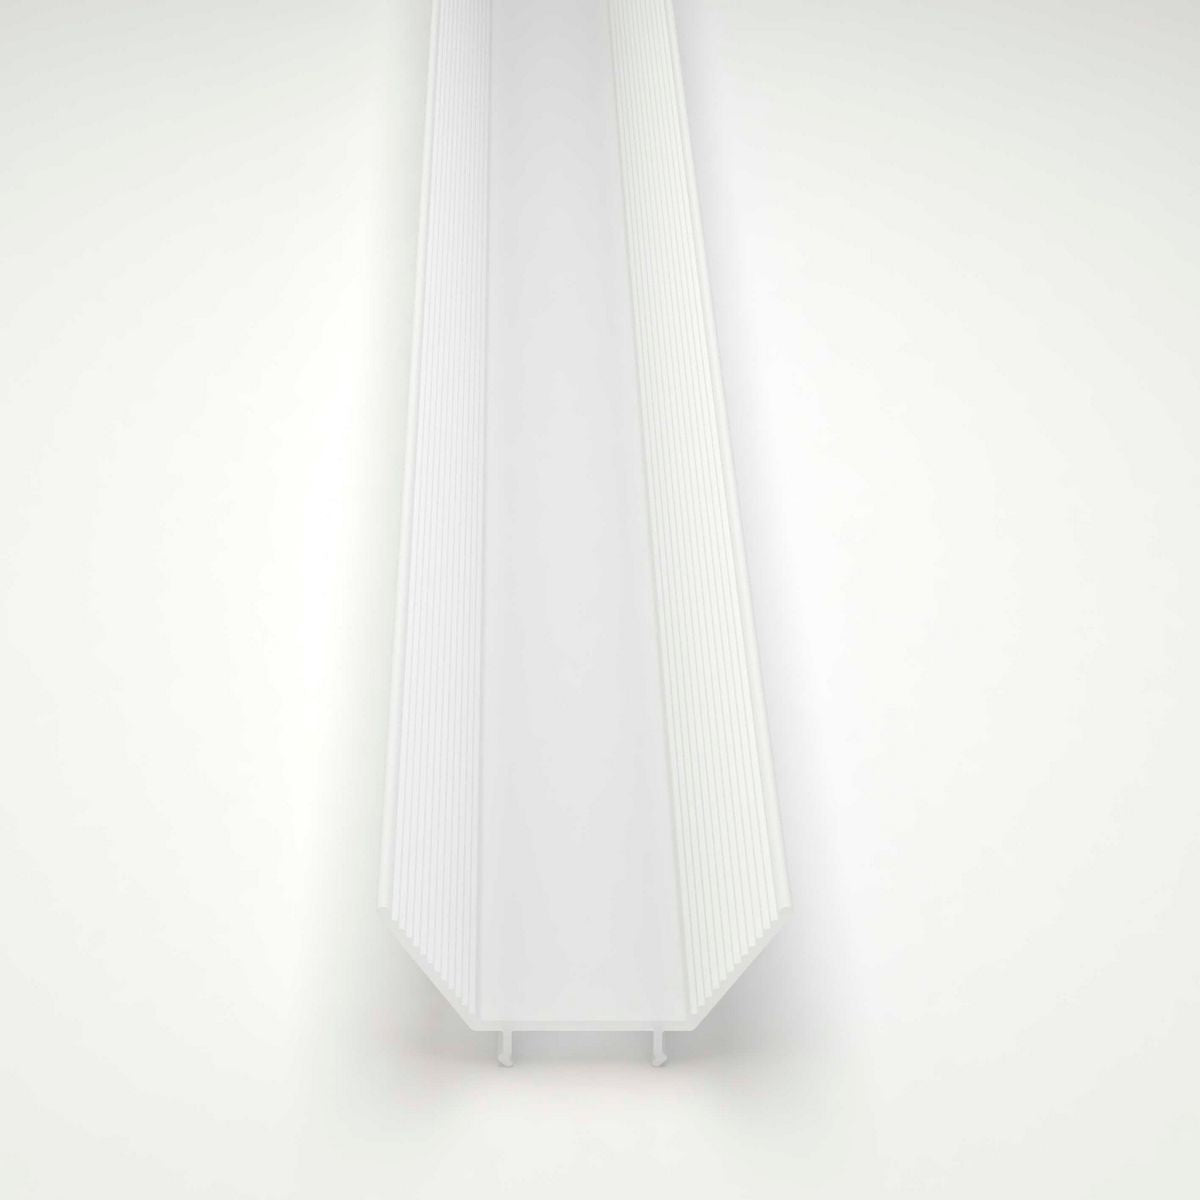 LED Diffuser with Side Wings for Easy-On XL Profiles